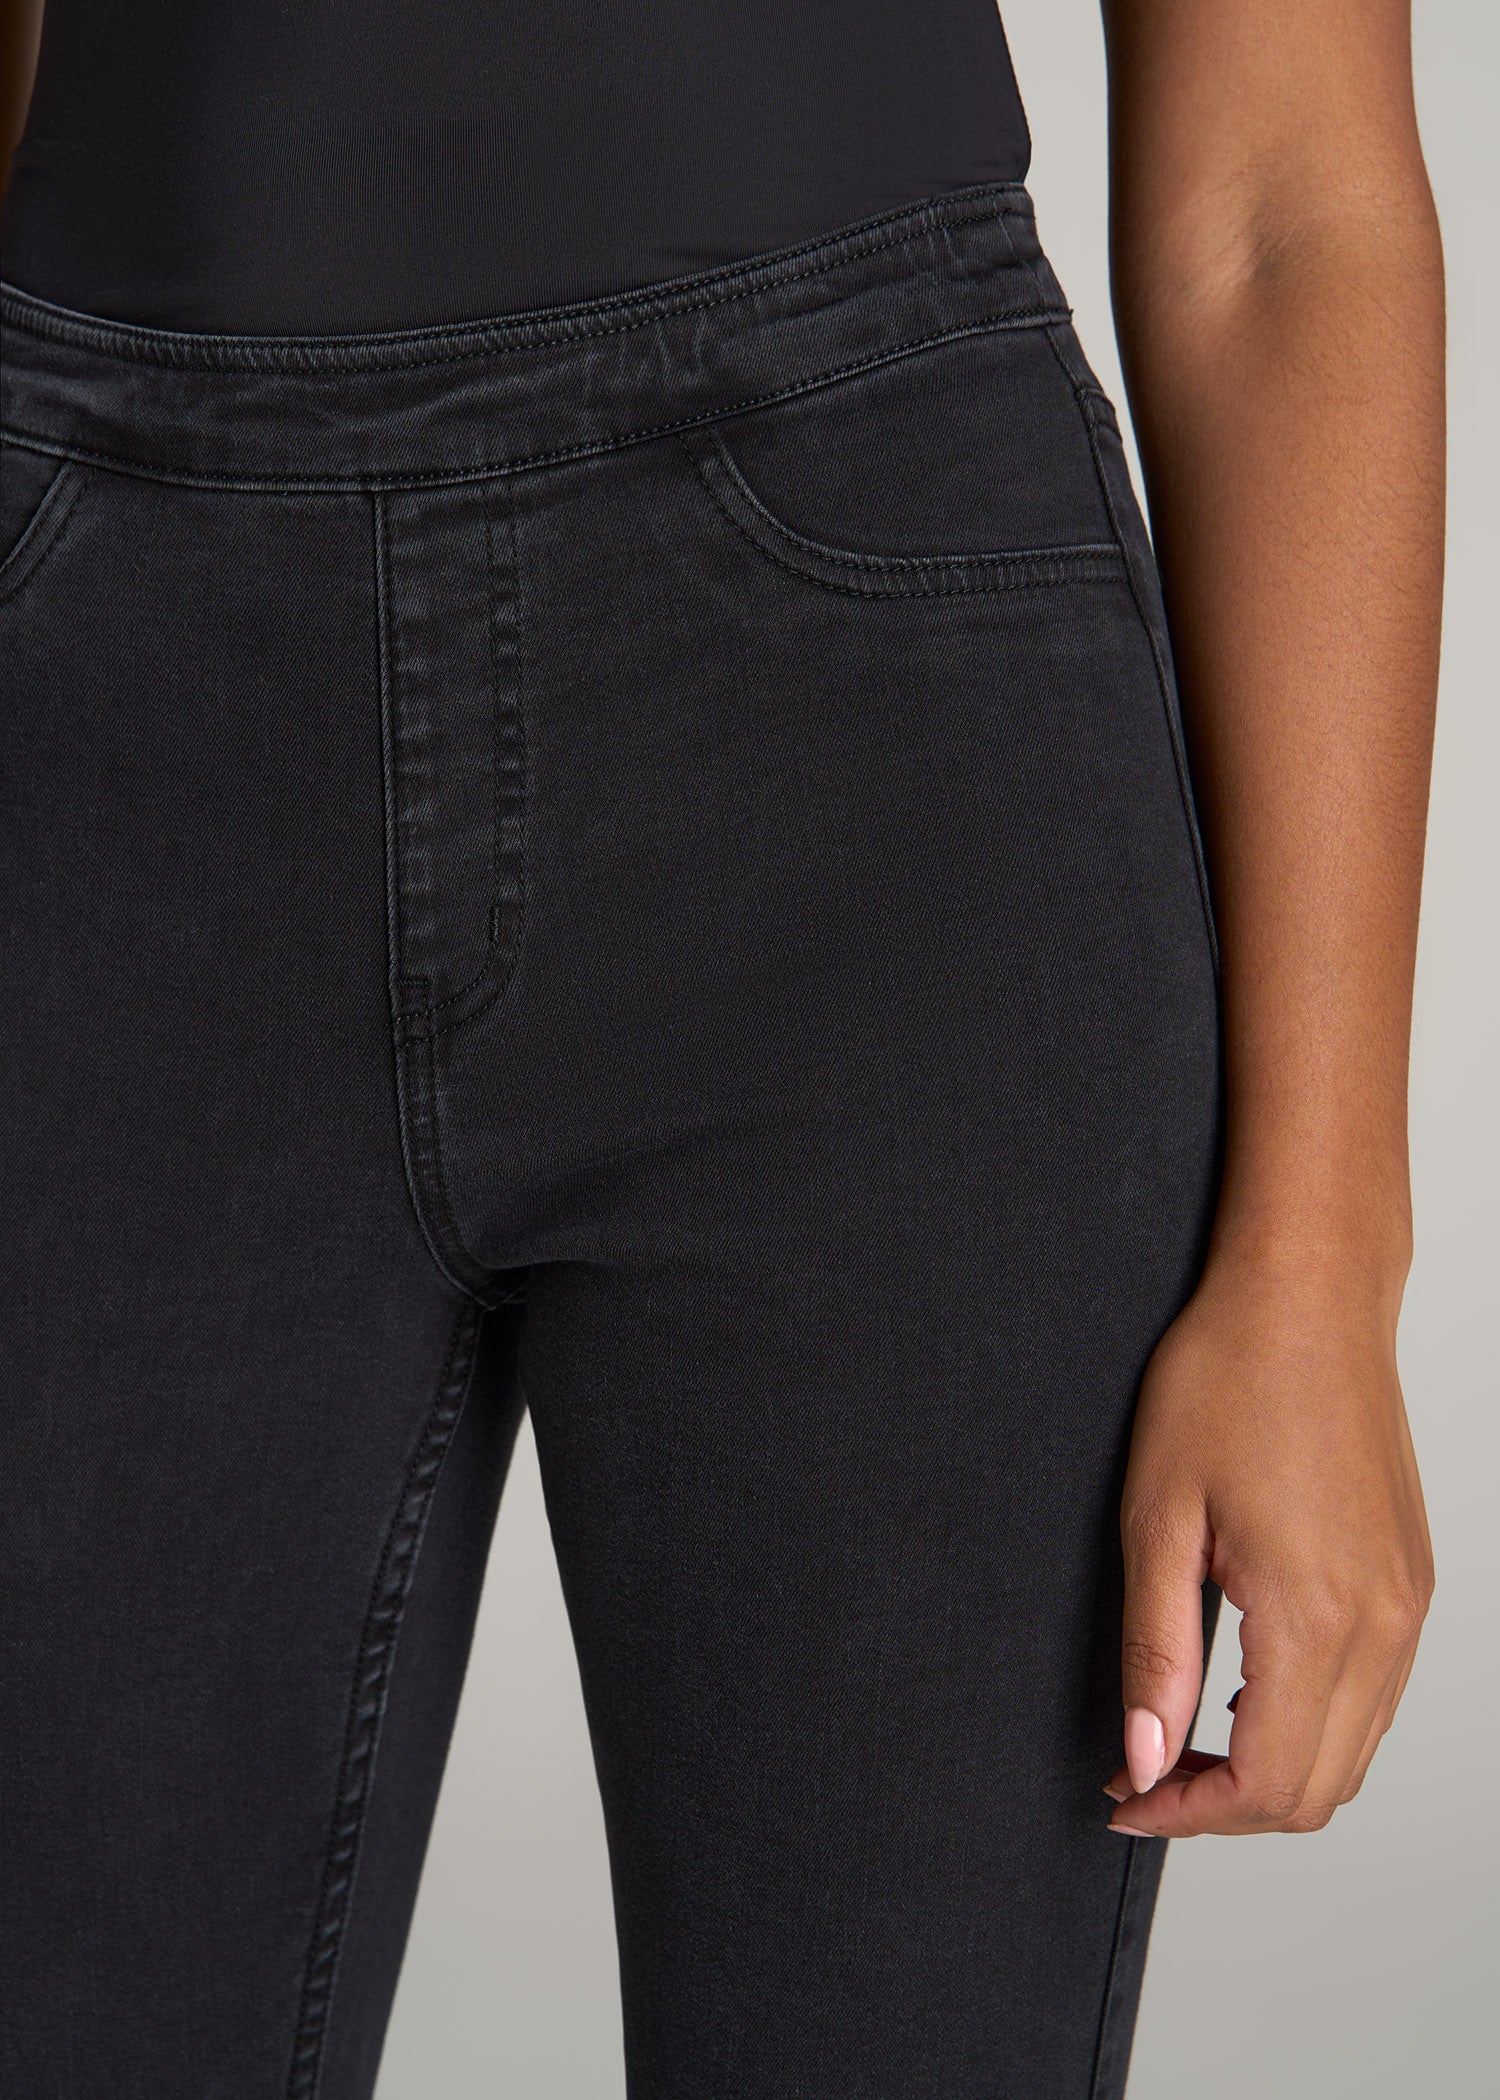 Buy Friends Like These Black Tall High Waisted Jeggings from Next India